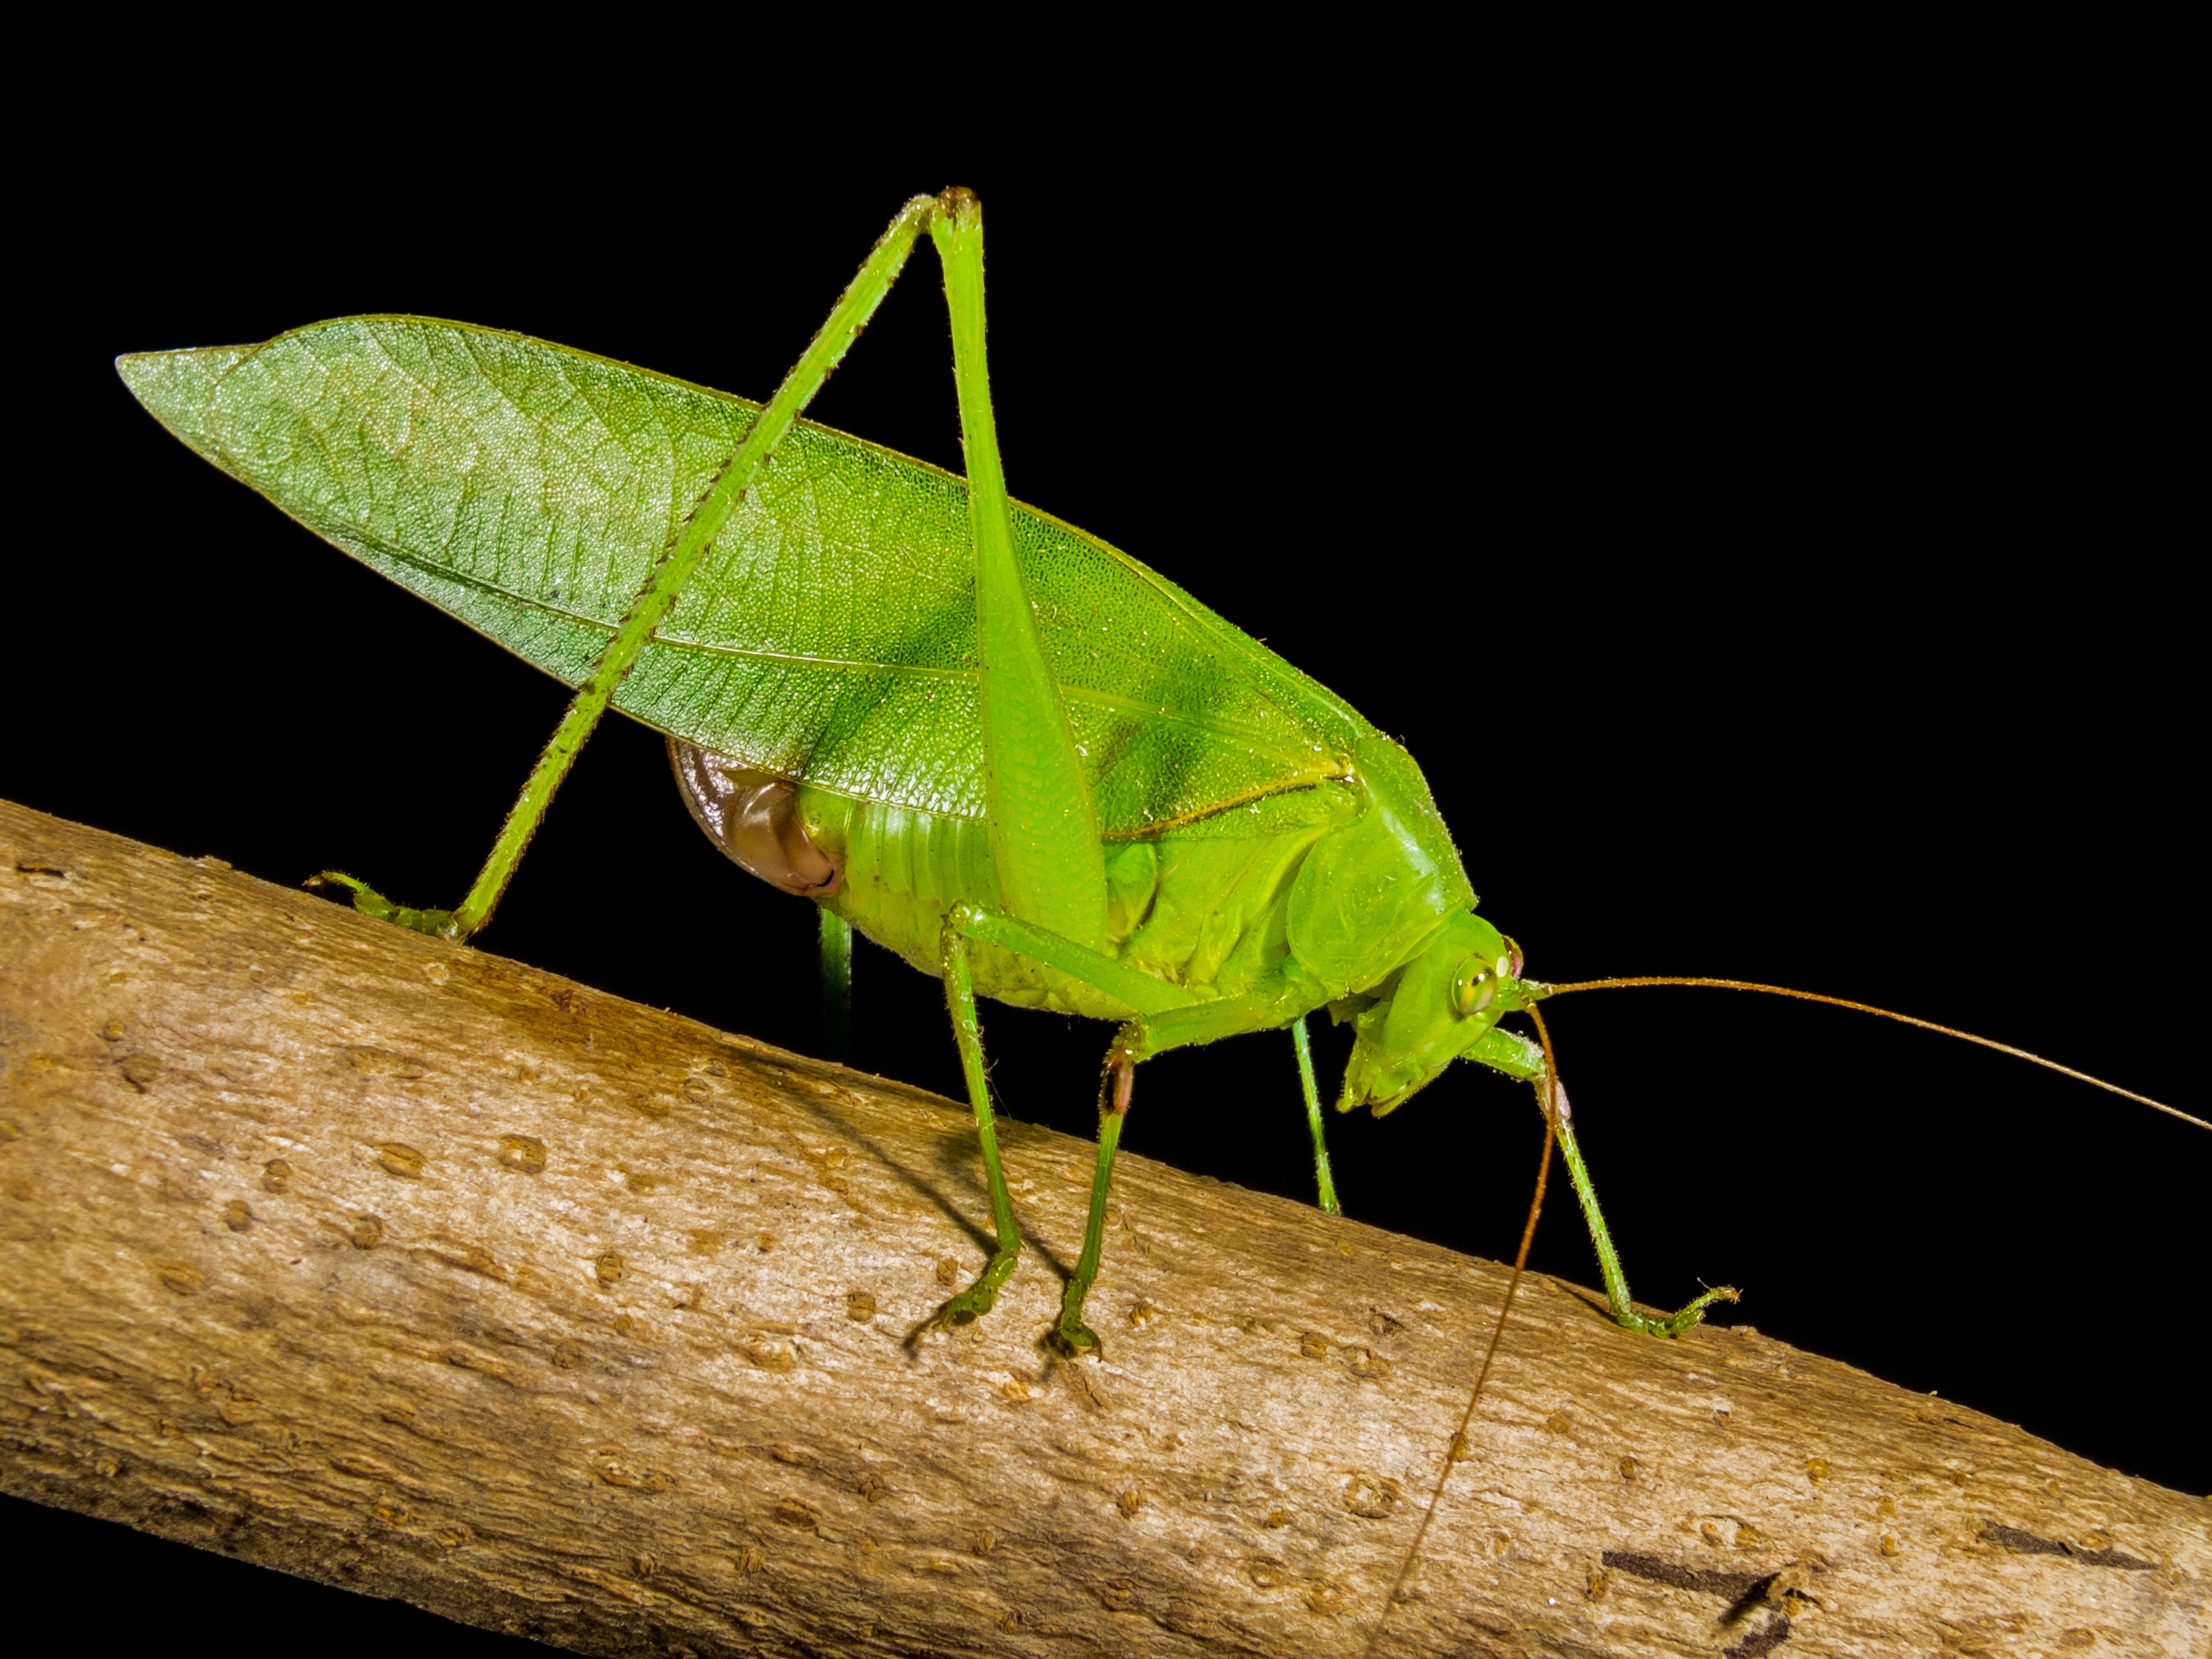 Grasshopper, Close, Green, one animal, insect